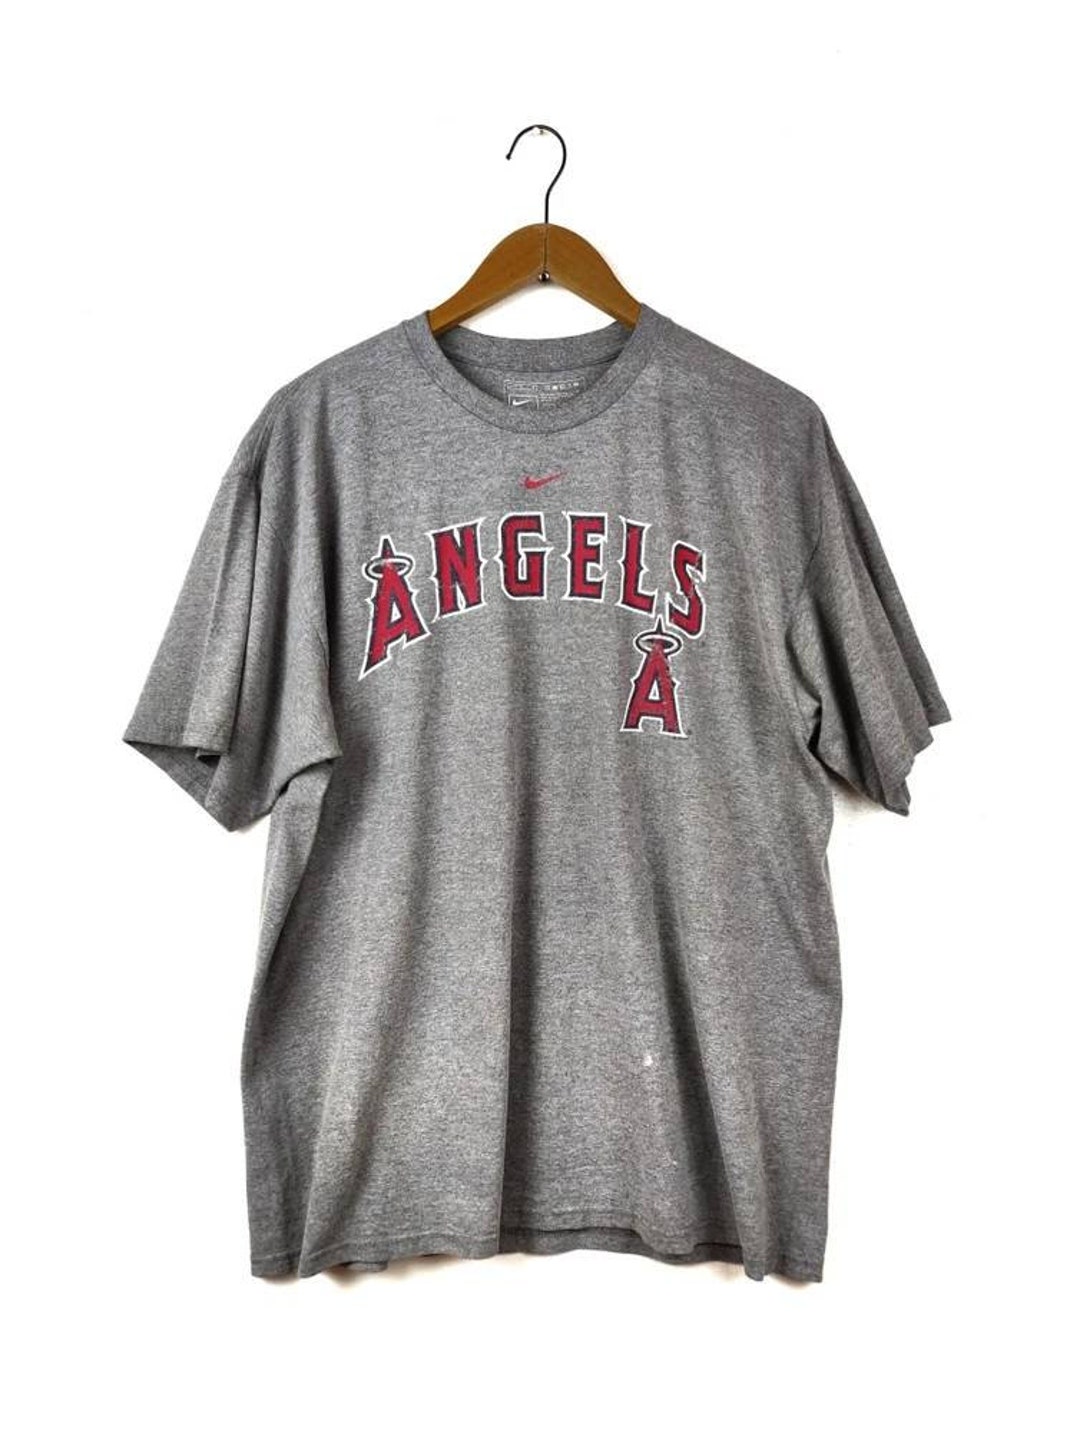 White Nike MLB Los Angeles Angels Home Jersey